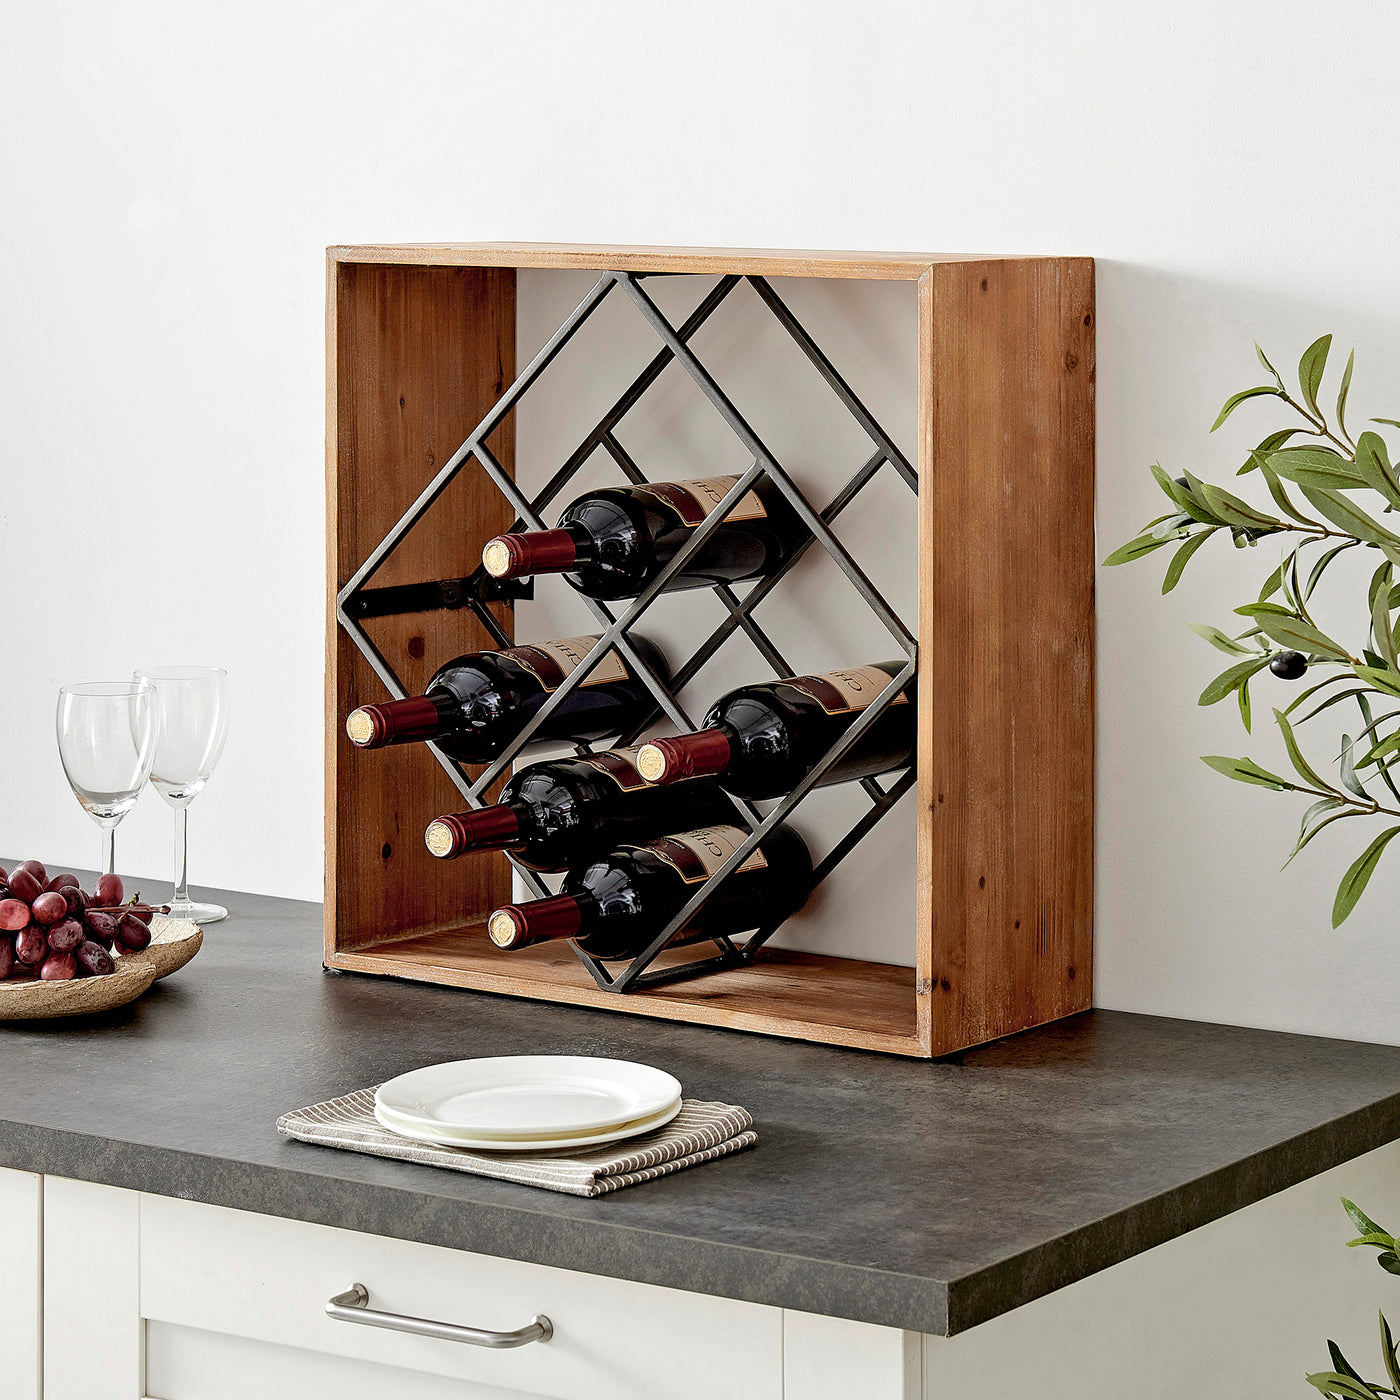 FirsTime & Co. Natural Winlock Wine Cube, Farmhouse Style, Made of Wood